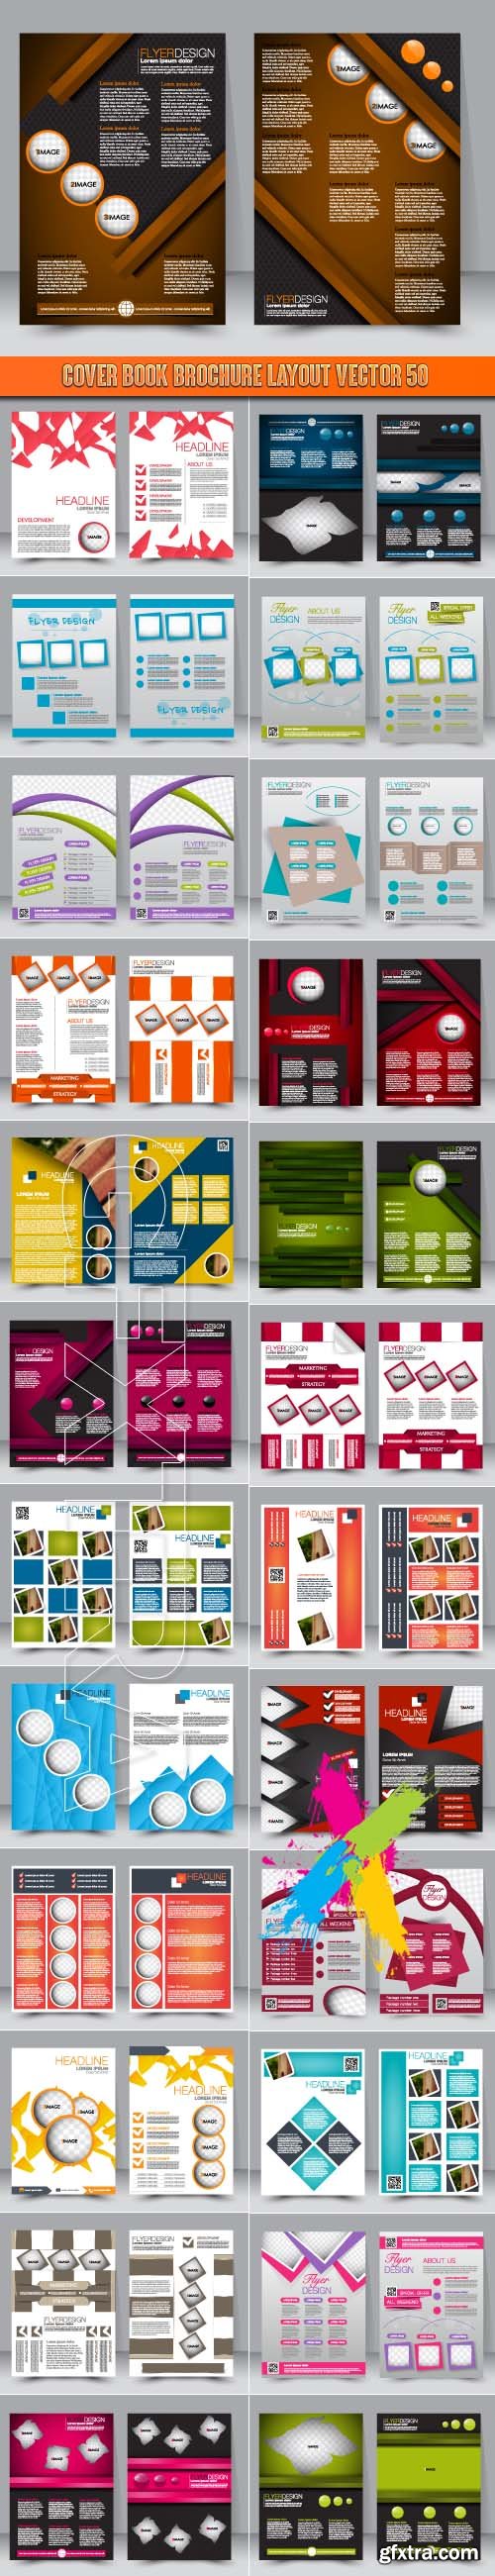 Cover book brochure layout vector 50